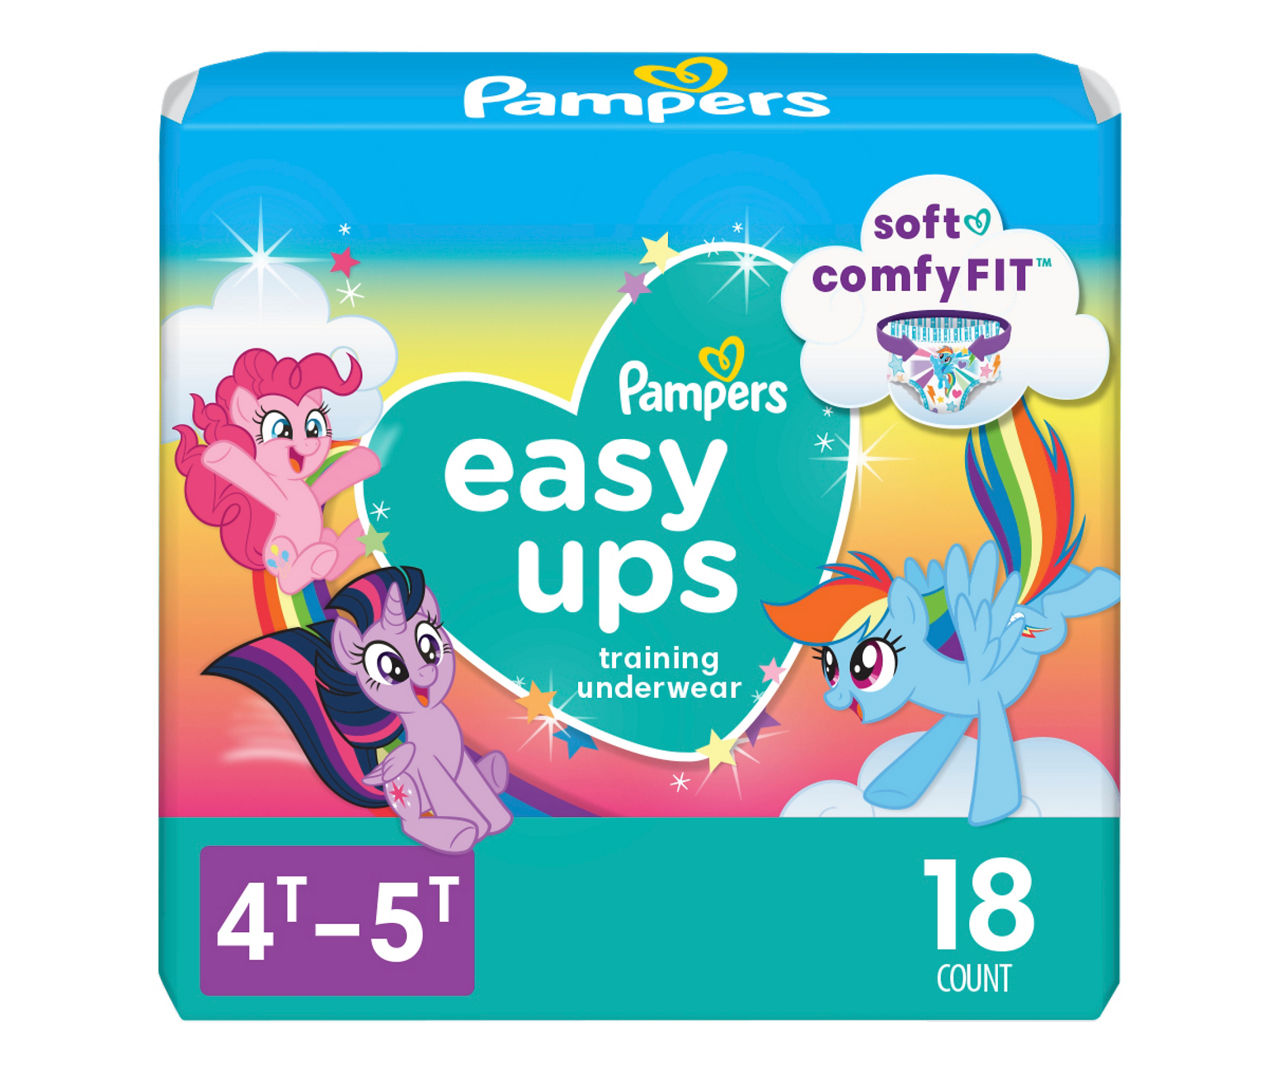 Pampers Size 4T-5T Easy Ups Training Underwear, 18-Count